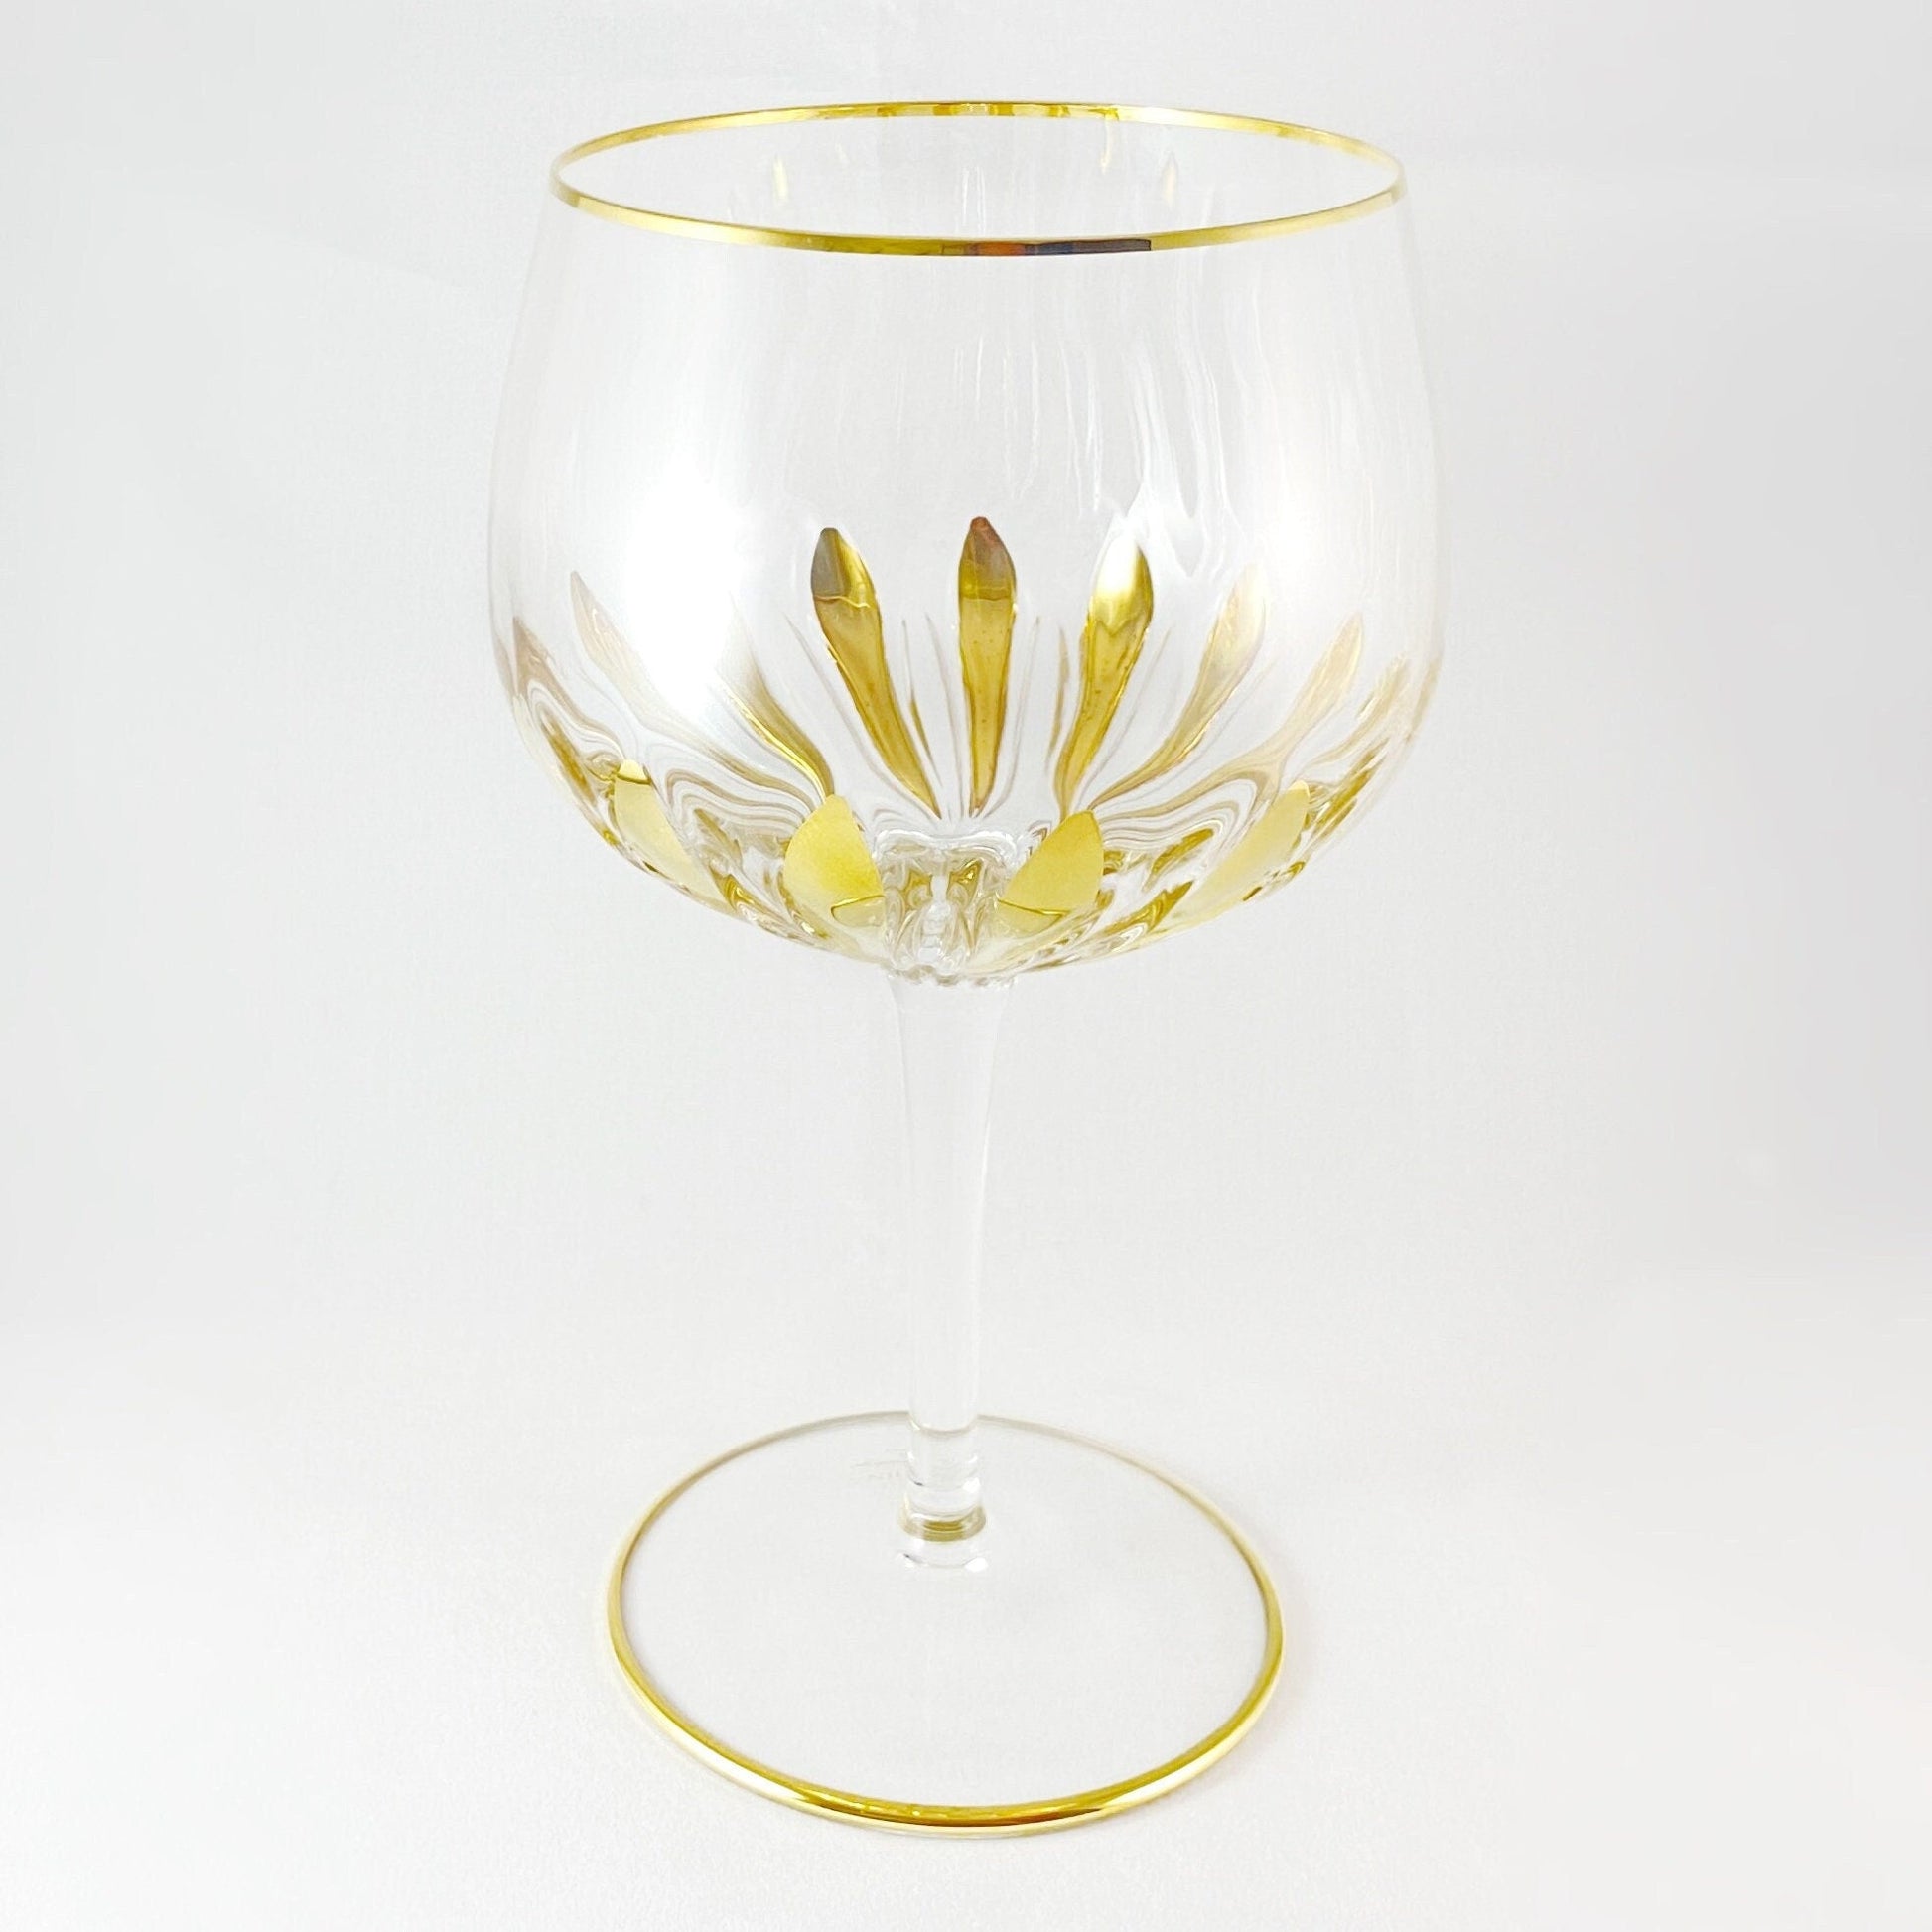 24kt Gold Incanto Large Venetian Wine/Gin Glass - Handmade in Italy, Colorful Murano Glass